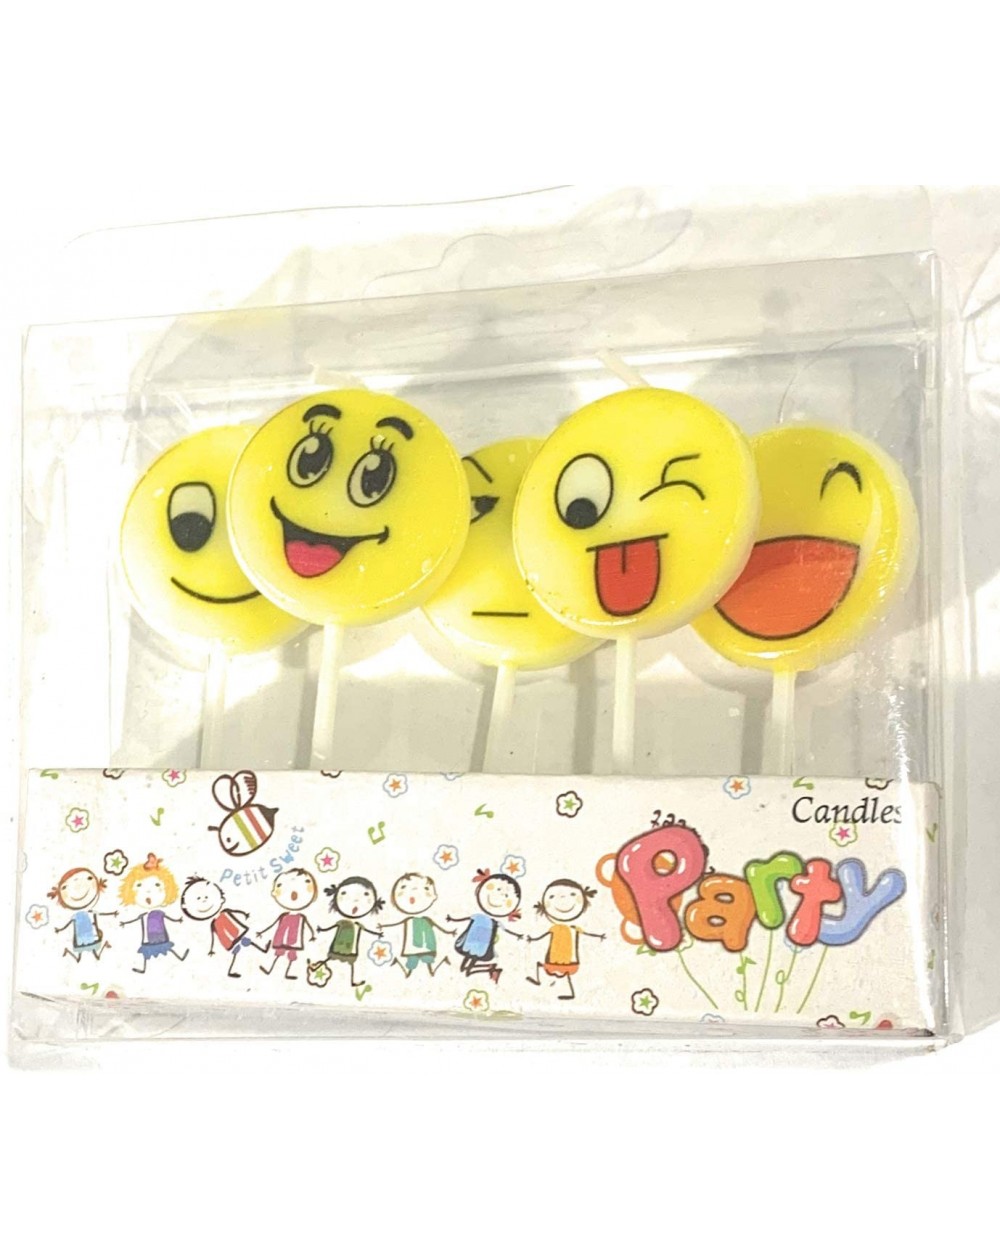 Cake Decorating Supplies Set of 5 Emoji Smiley Birthday Candles Kids Party Decorations - C818CC6GZ9T $9.19